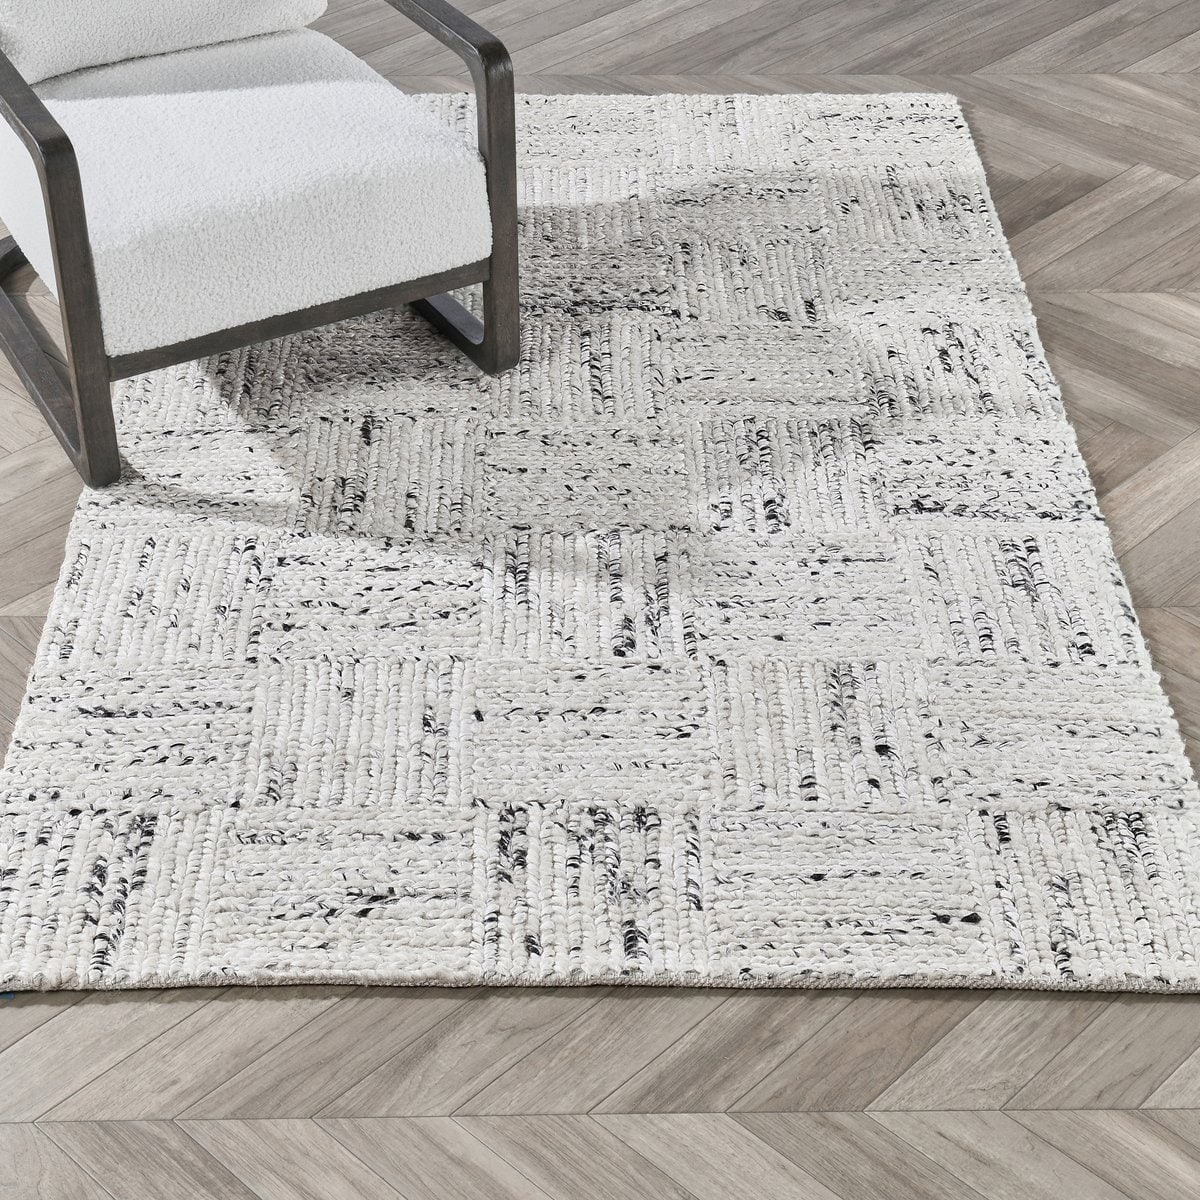 https://ak1.ostkcdn.com/images/products/is/images/direct/2718d455130ac5f37de6706839197336c79dabfb/Sosa-Abstract-Wool-Blend-Area-Rug-by-Kosas-Home.jpg